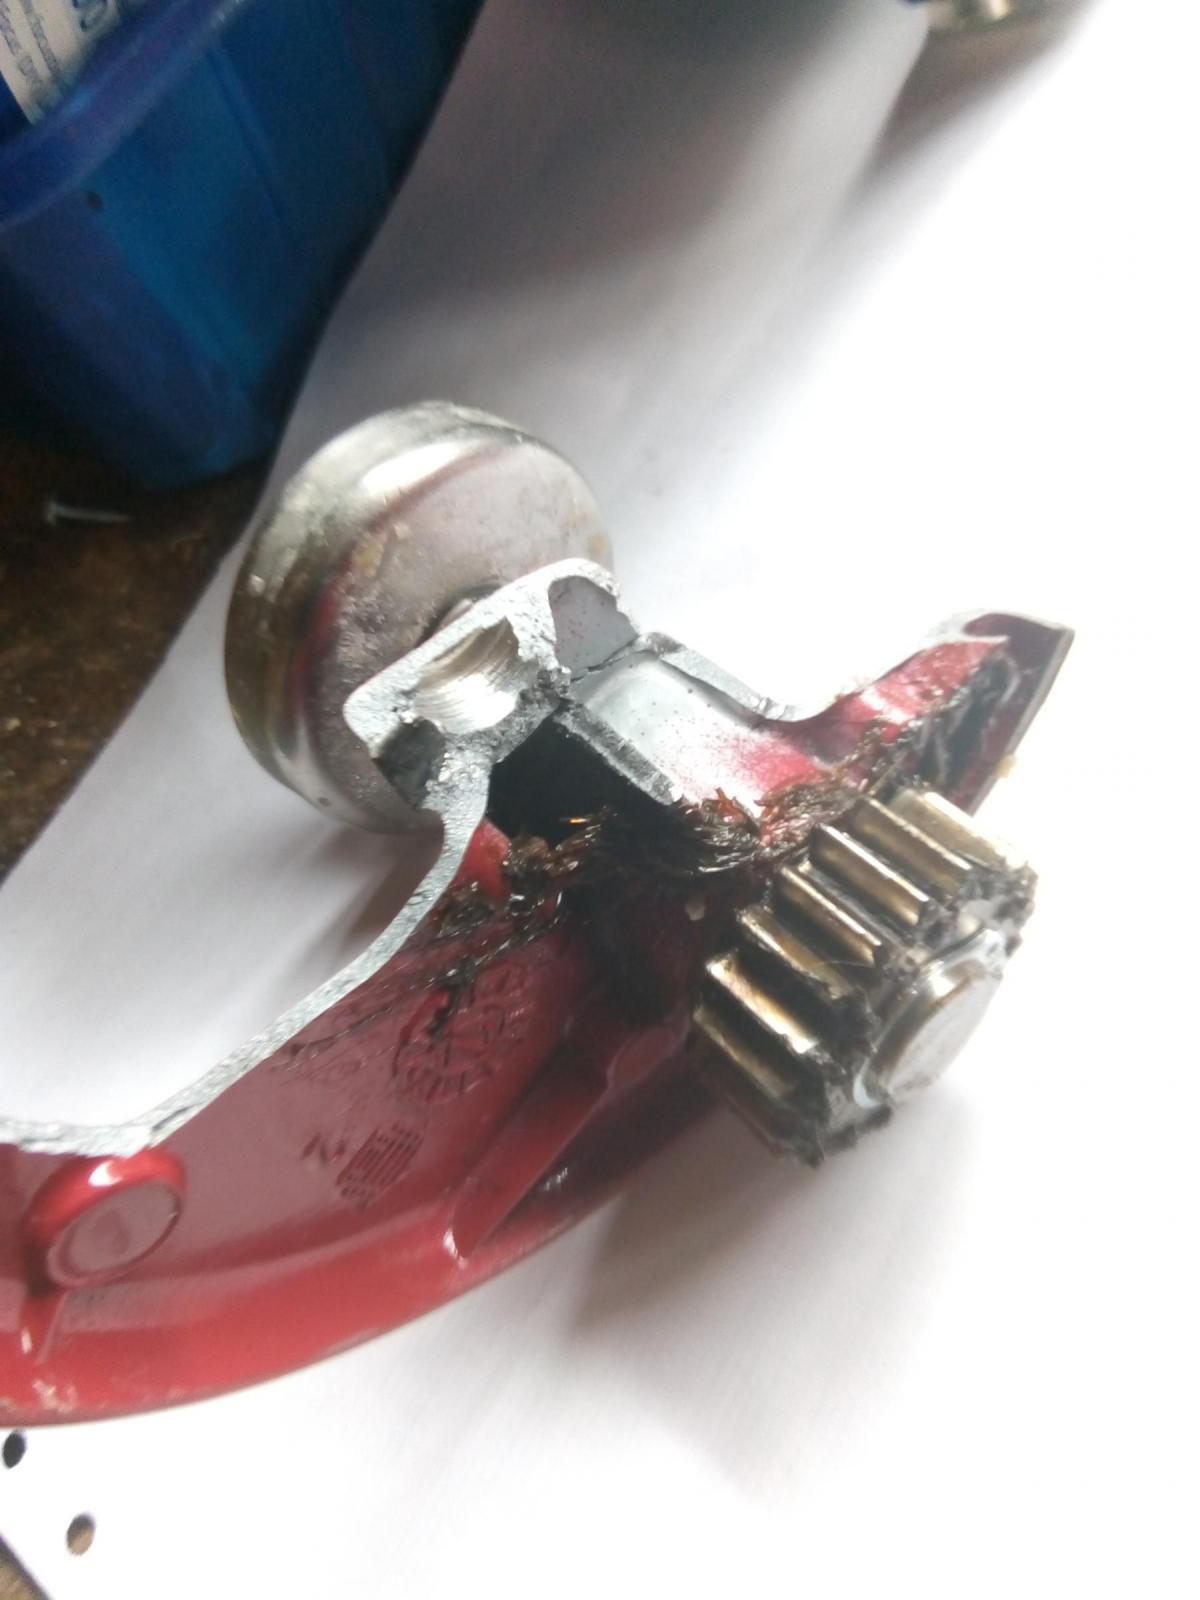 Kitchenaid Mixer: Method - How to open and repack grease when